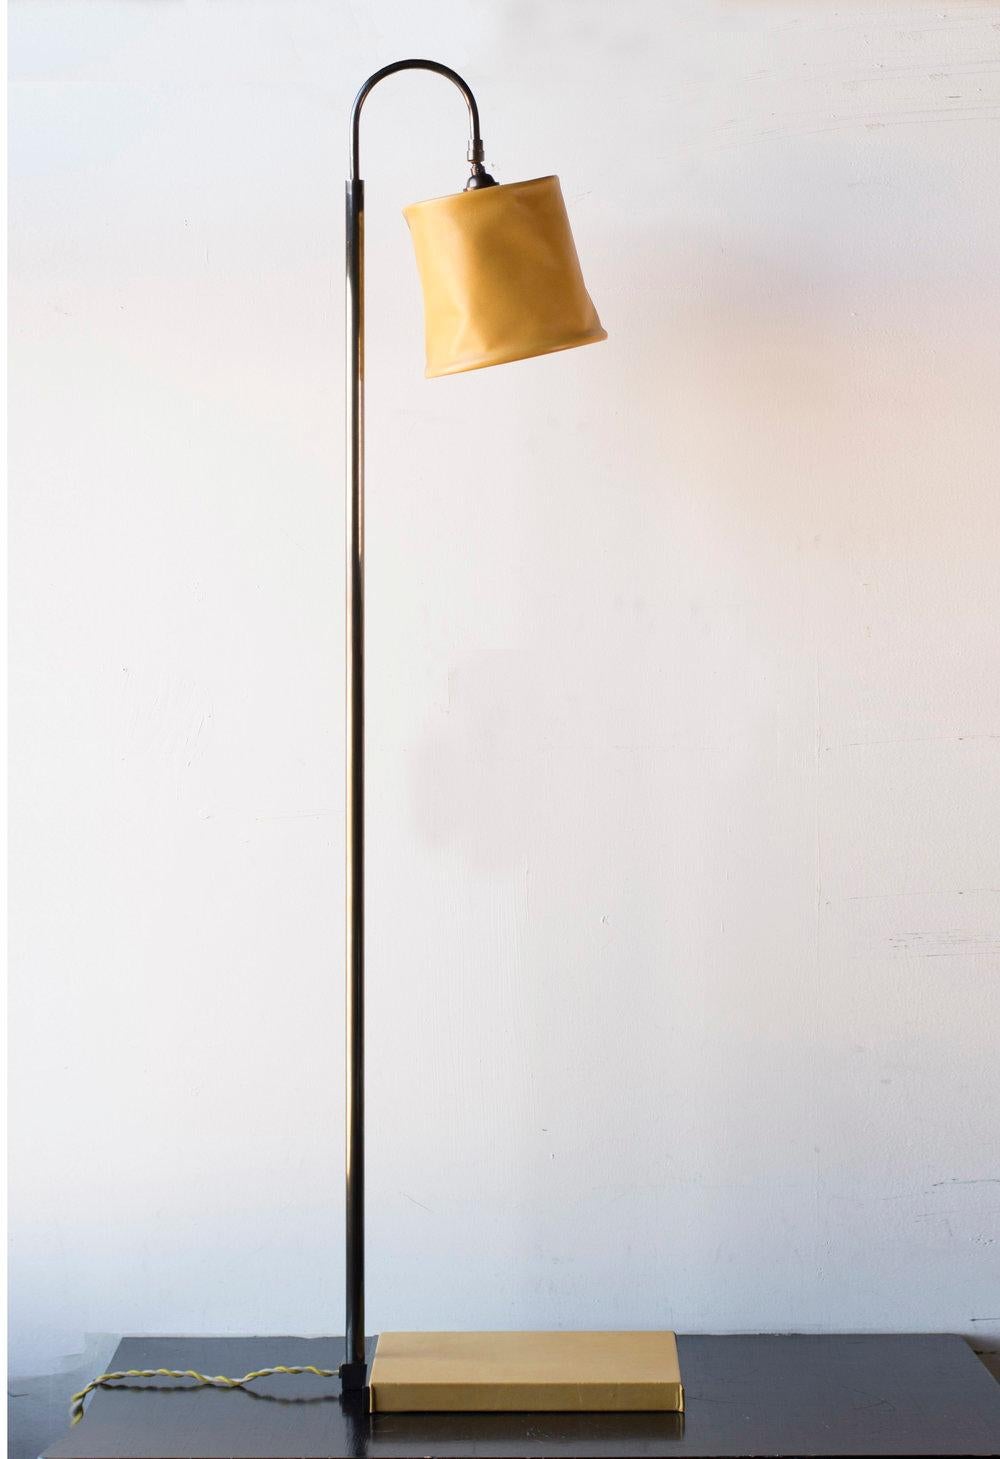 Series01 Floor Lamp, Hand-Dyed Sable, Brown Leather, Dark Patinated Brass In New Condition For Sale In Ozone Park, NY